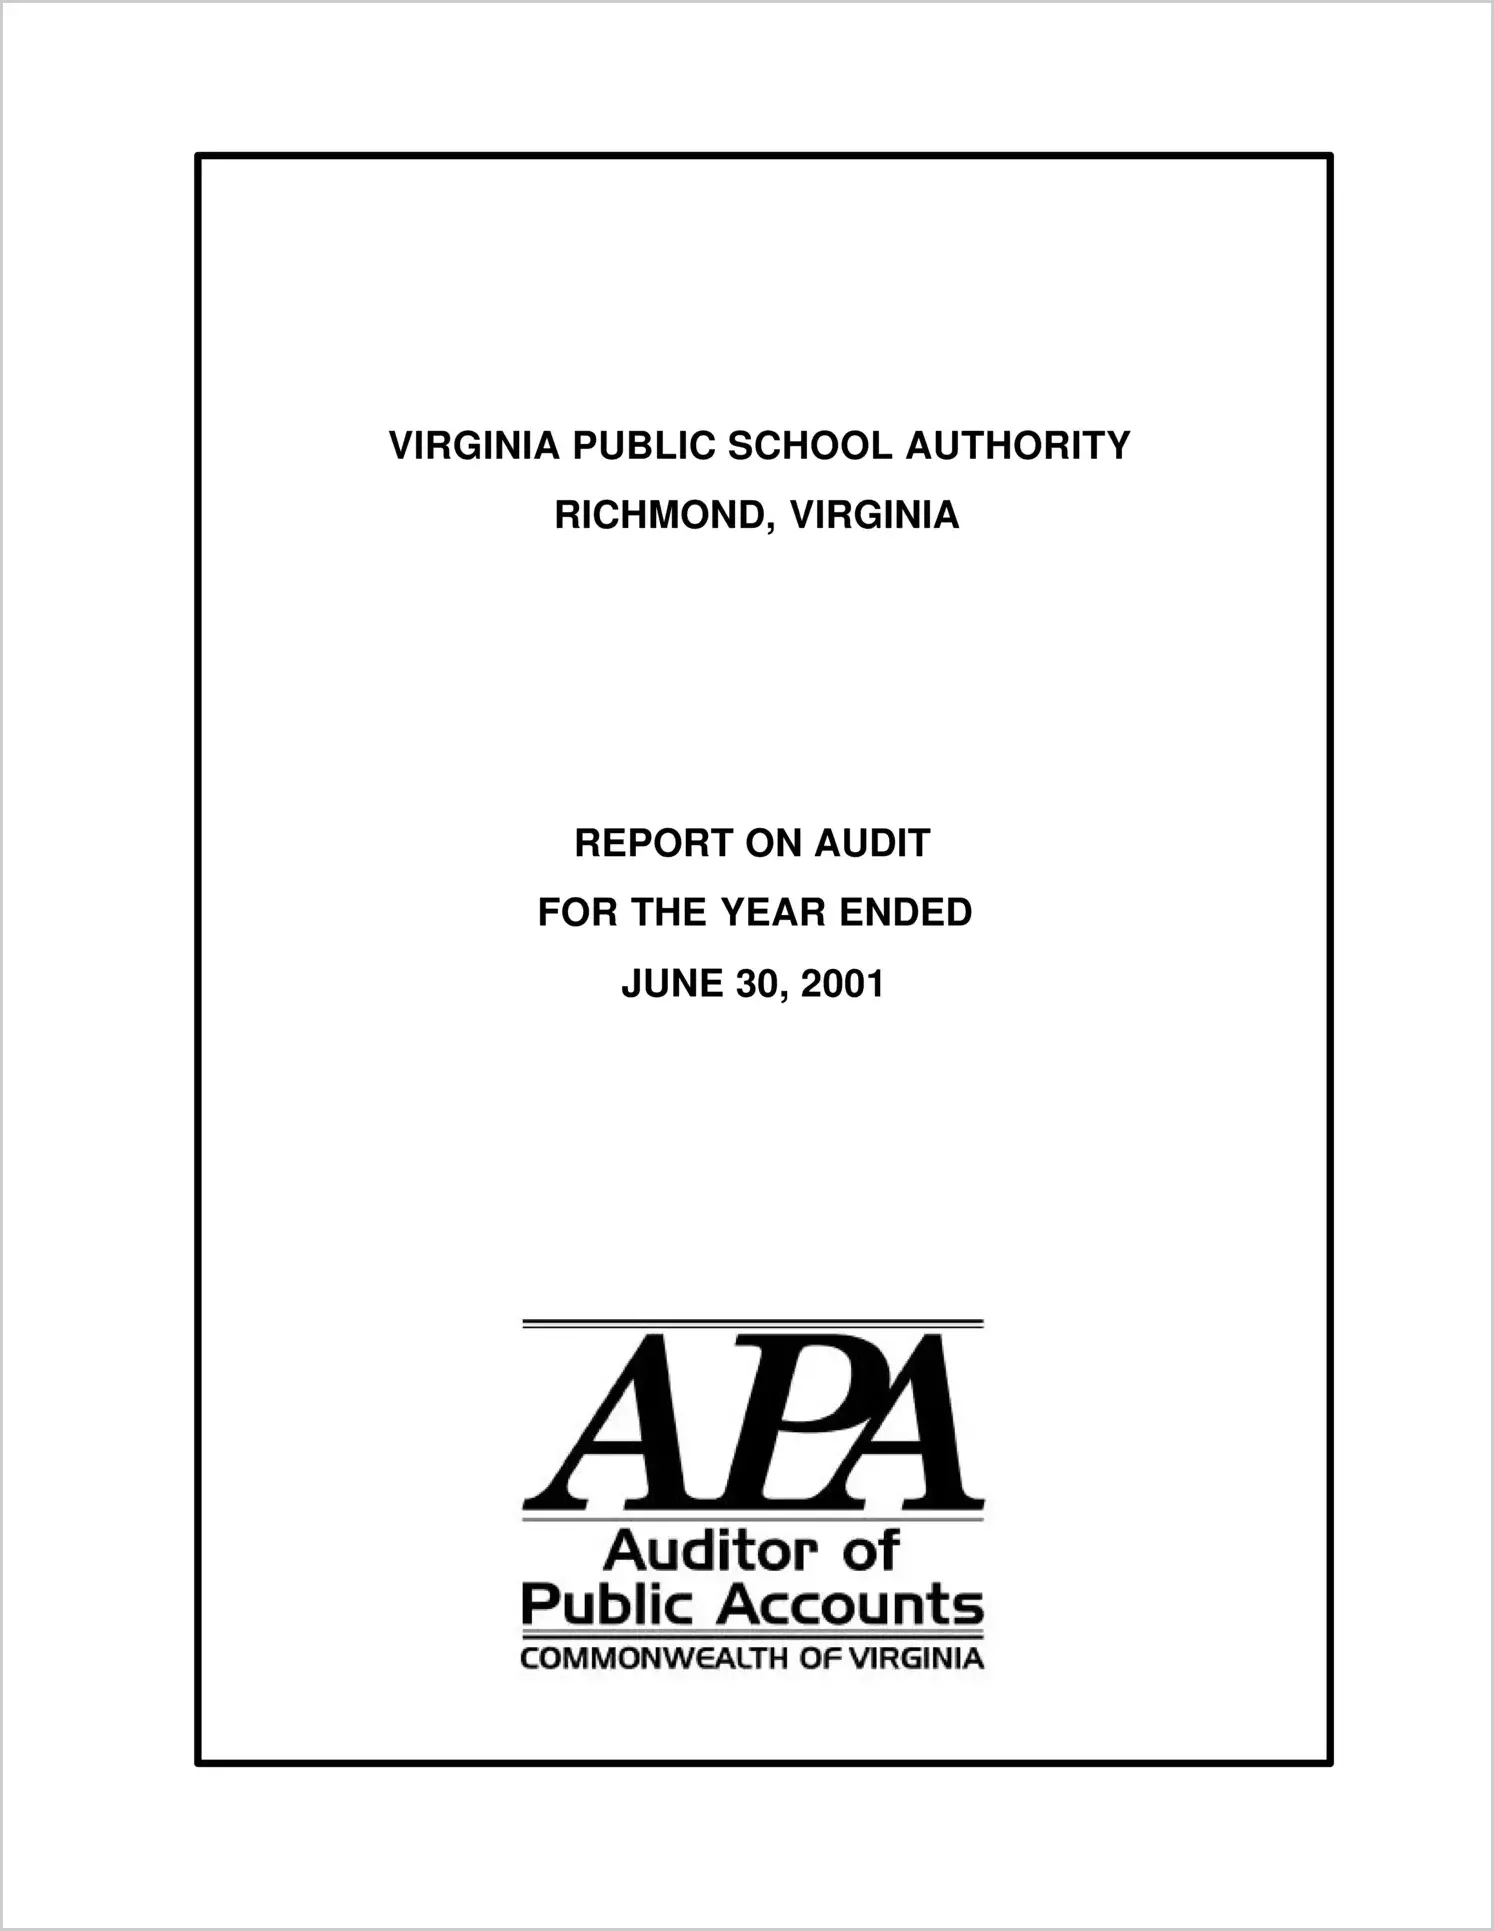 Virginia Public School Authority for the year ended June 30, 2001